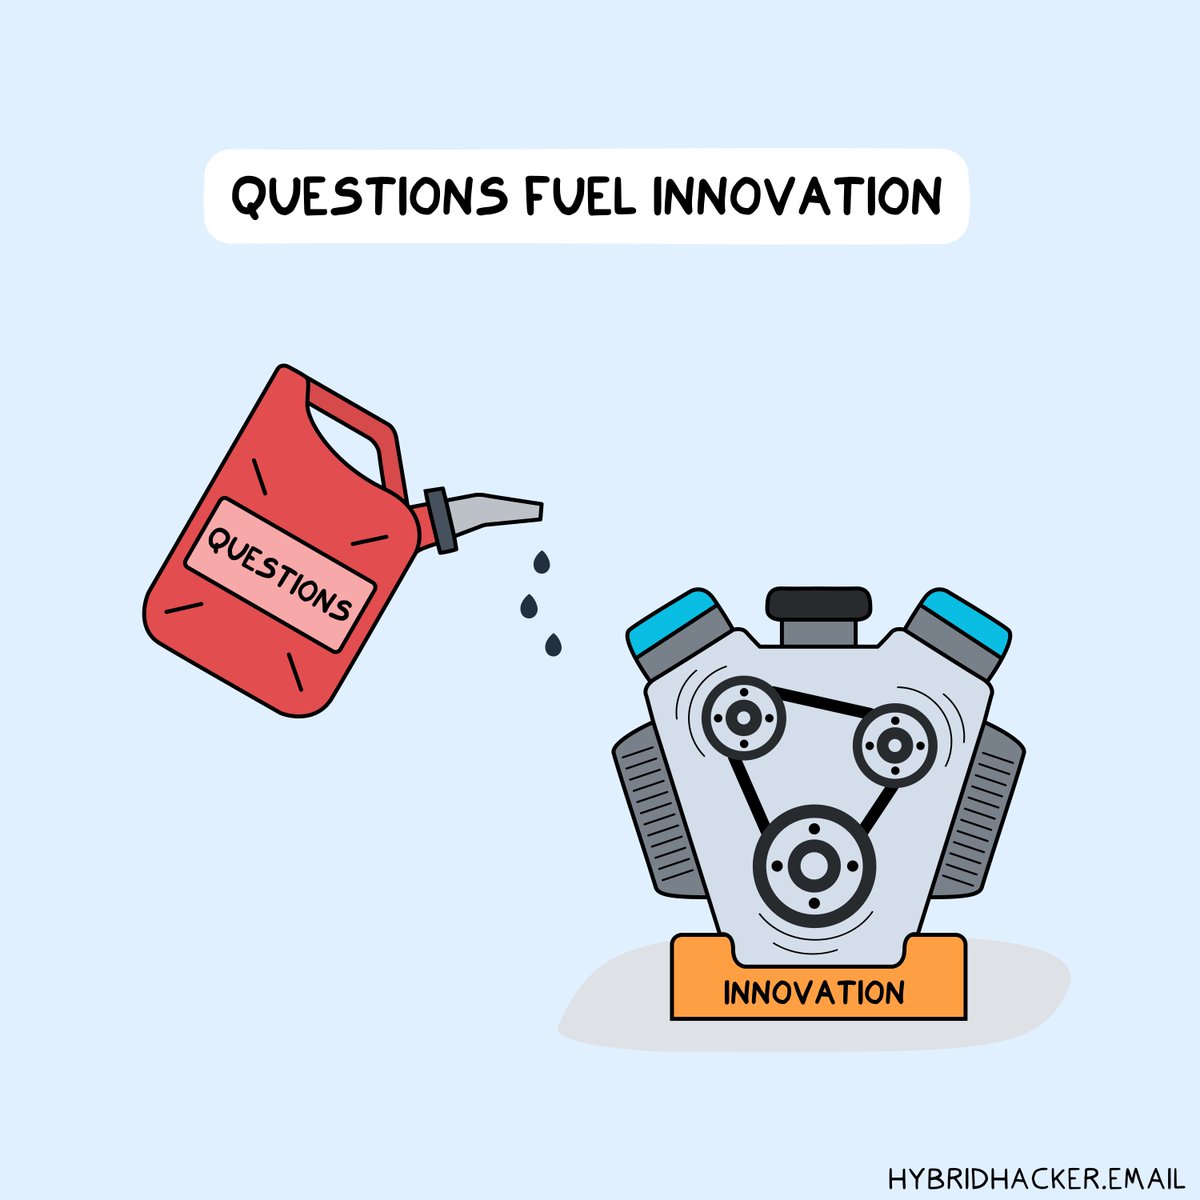 In my life, I've seen many experts become somewhat annoyed by others asking questions. ⛽️ However, questions are what fuel the engine of innovation. Without them, many things we take for granted today would not exist. Let me give you some examples. 🌐 The Internet: it began